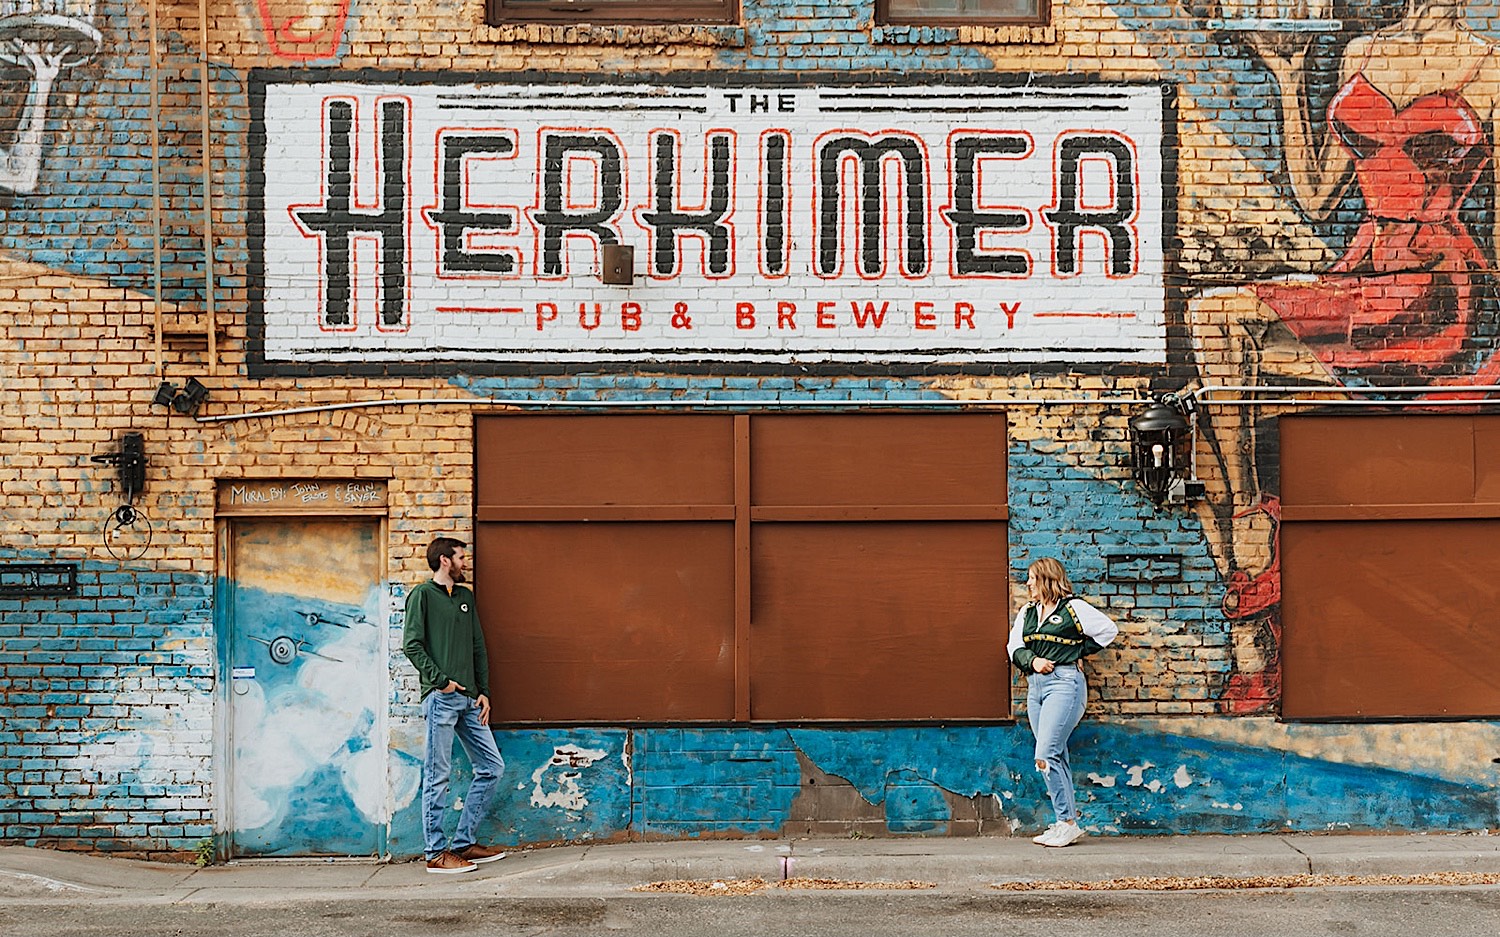 A man and woman look at one another while leaning against a brick wall with a mural for the Herkimer Brewery on it while taking engagement photos in downtown Minneapolis